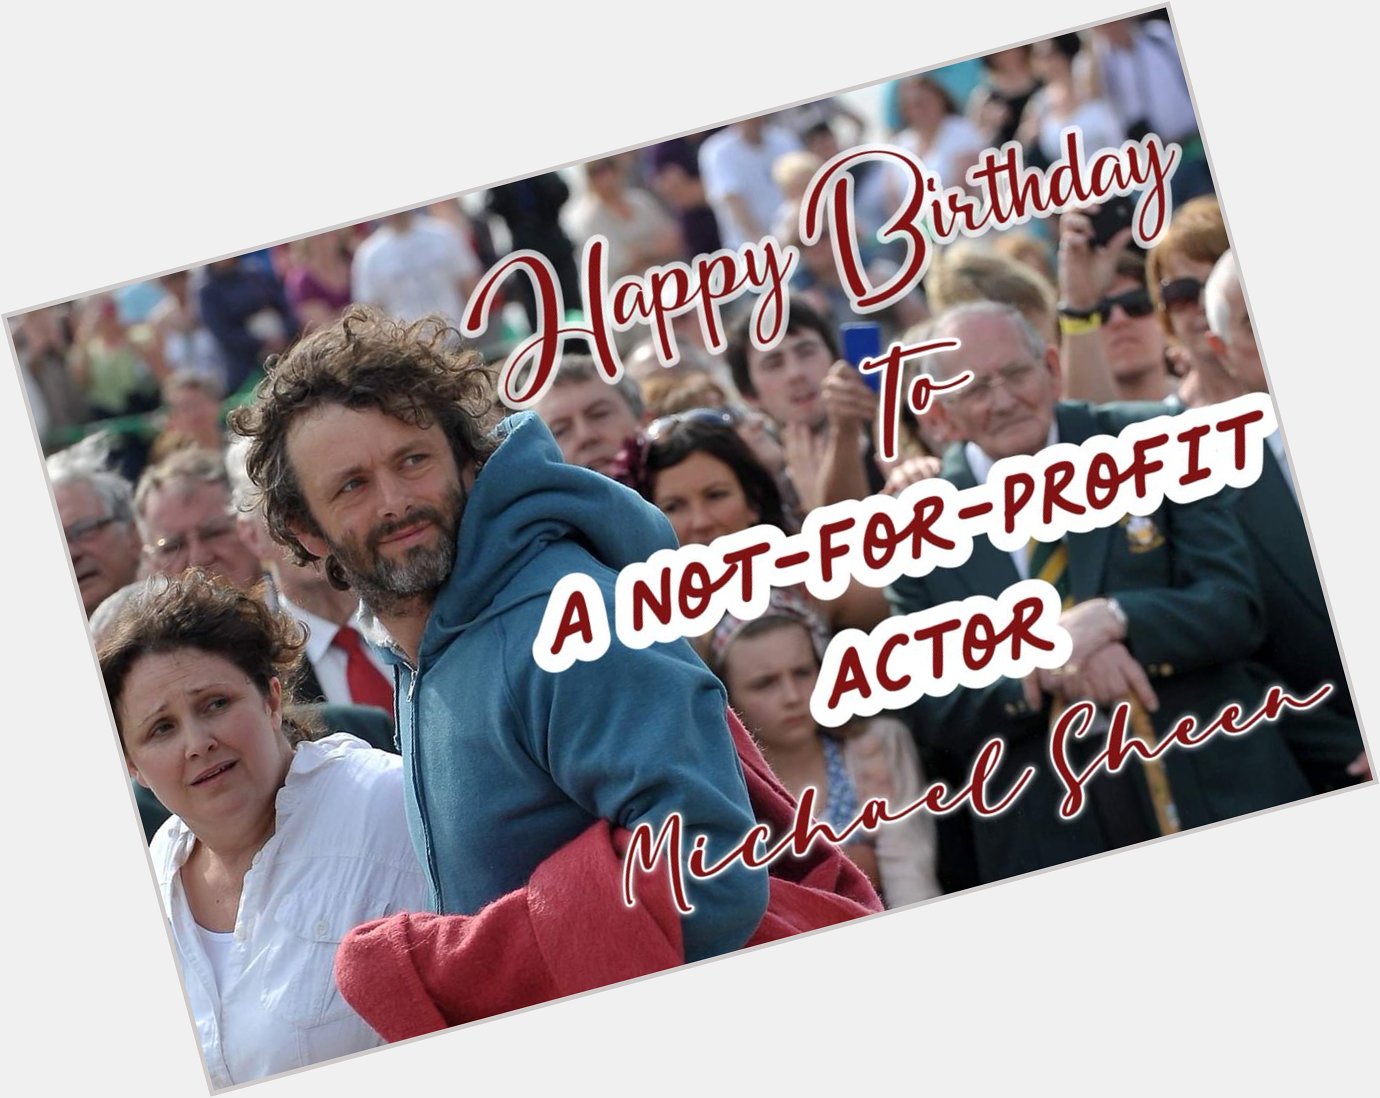 Happy Birthday to Michael Sheen!
Hope your dreams come true! And have a good day! 